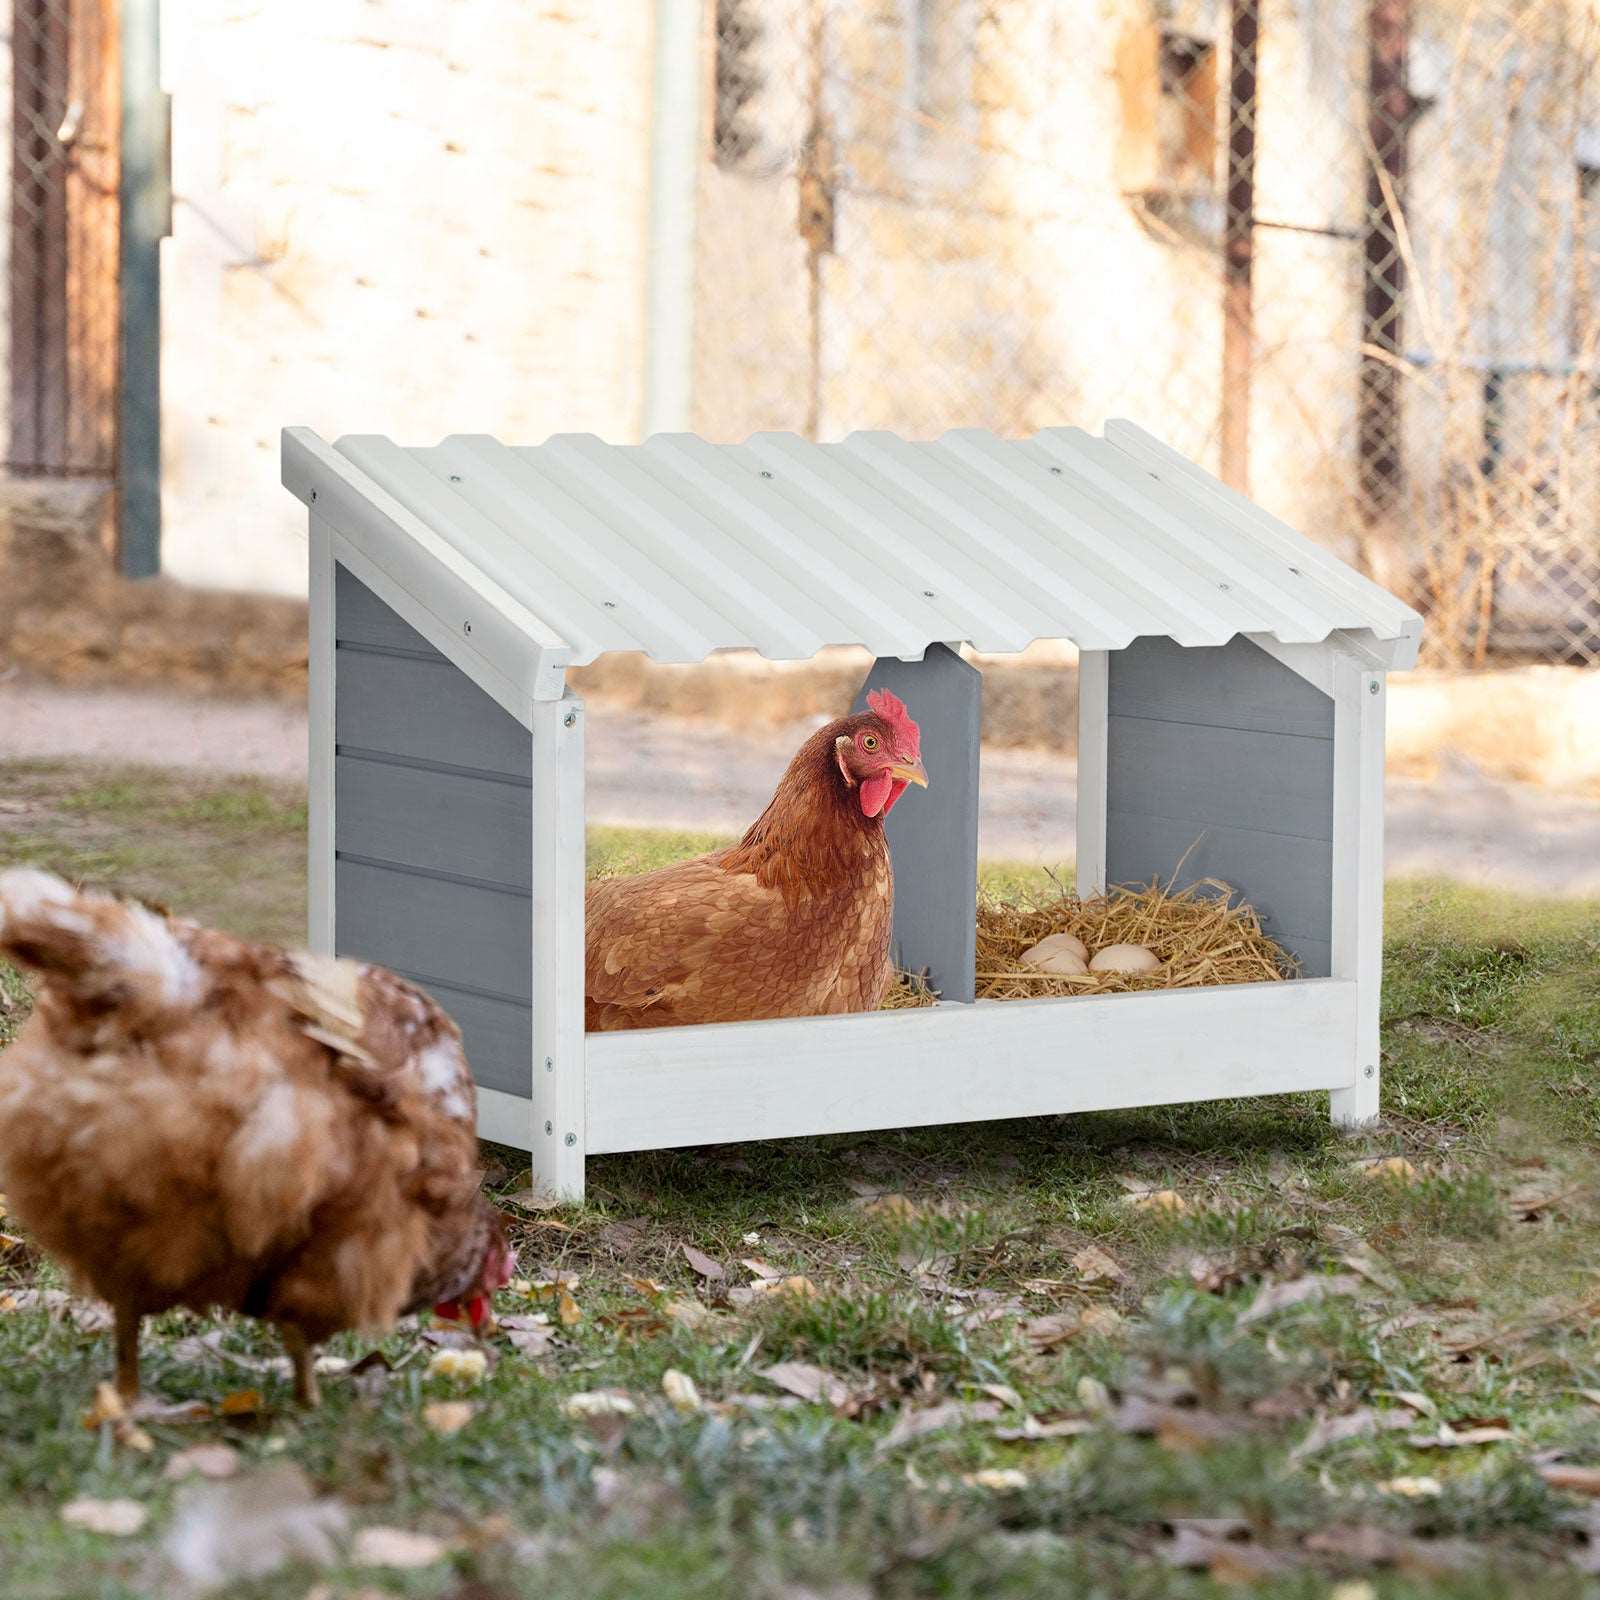 petsfit-double-pvc-roofed-nesting-boxes-heavy-duty-chicken-duck-poultry-laying-nests-essential-coop-accessory-05